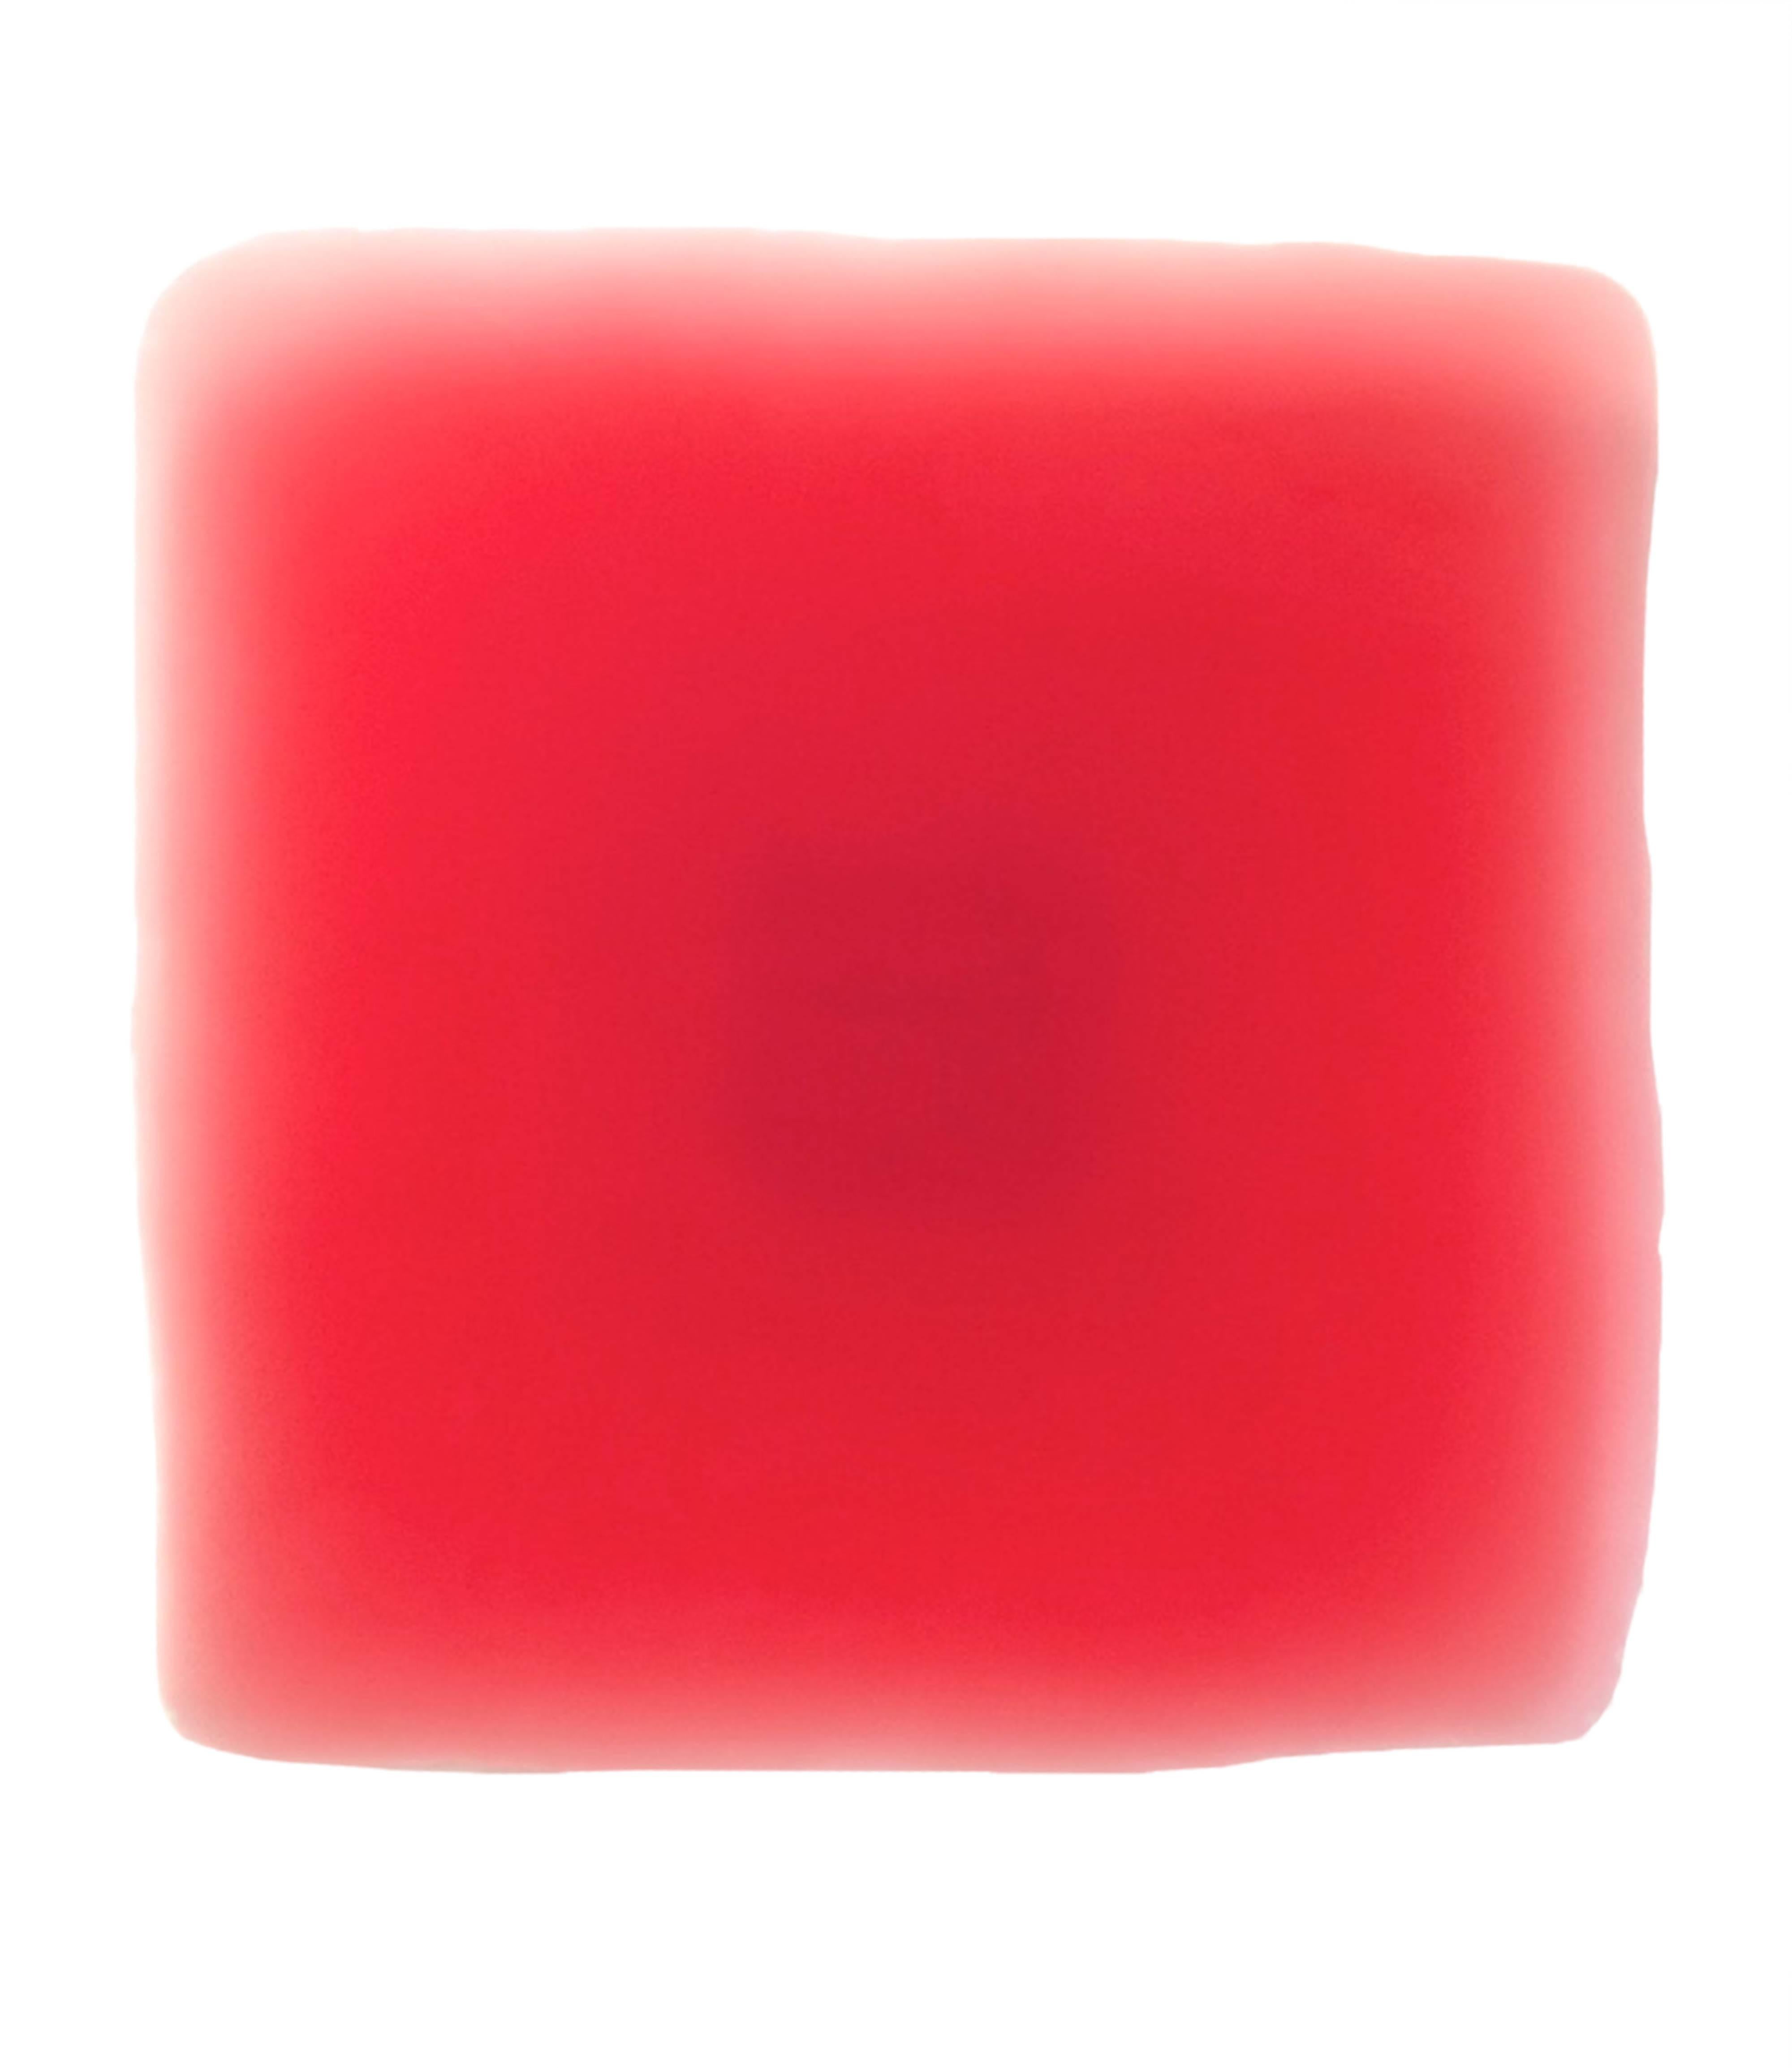 Peter Alexander Abstract Painting - 4/20/14 (Red Puff)